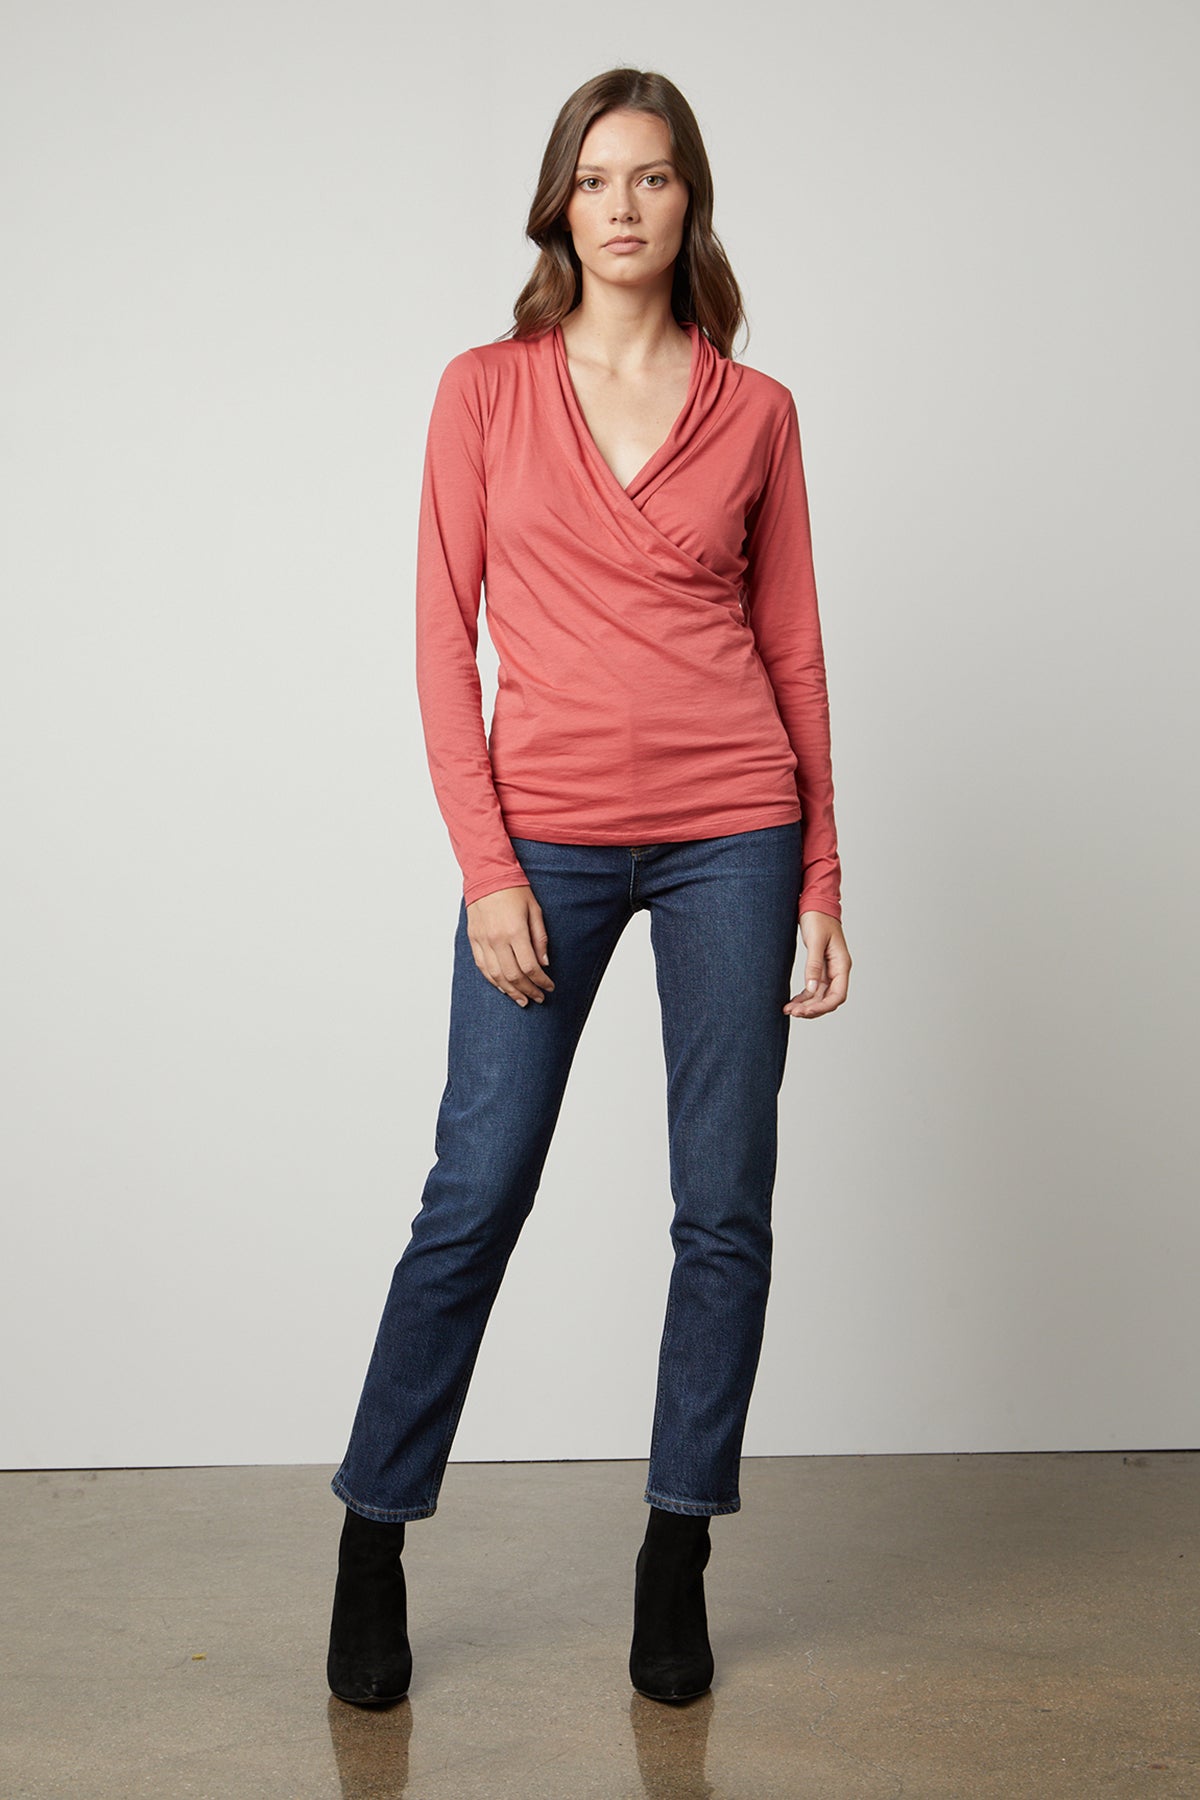   The model is wearing a Velvet by Graham & Spencer MERI WRAP FRONT FITTED TOP and jeans. 